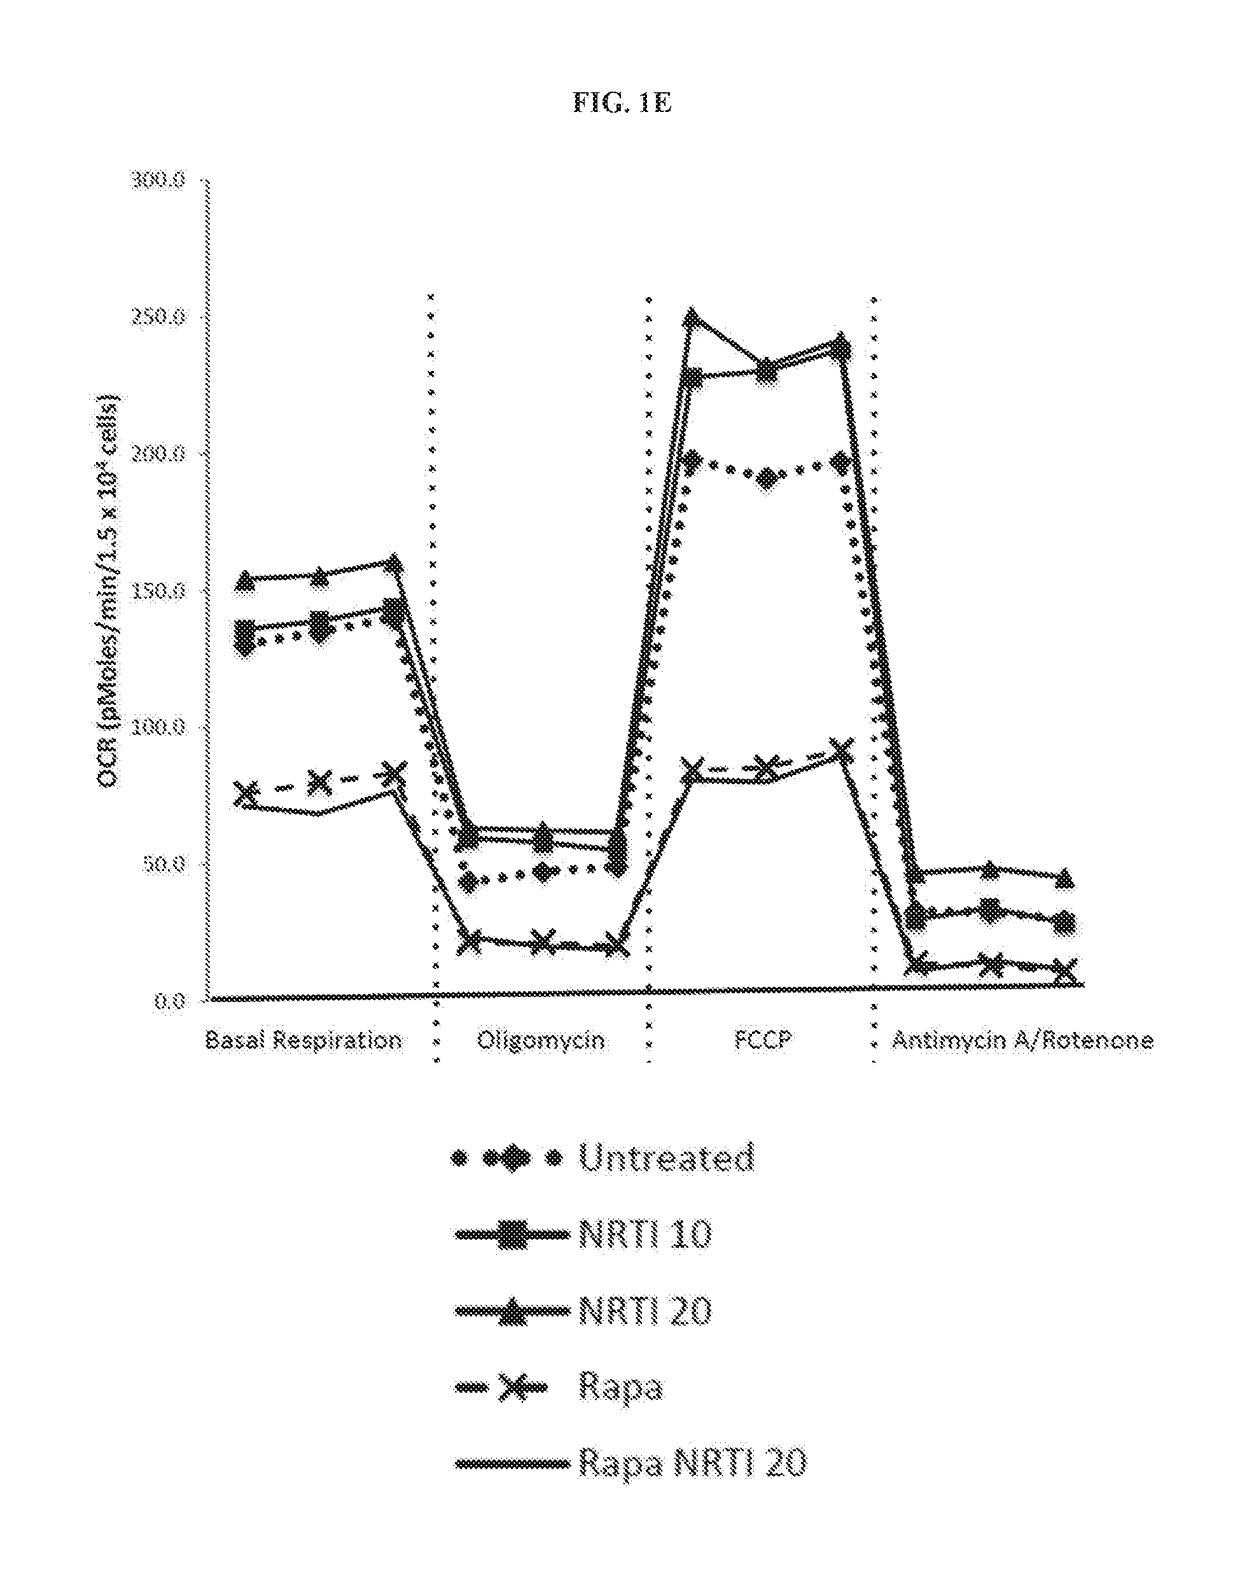 Novel Compositions and Methods for Treating or Preventing Dermal Disorders